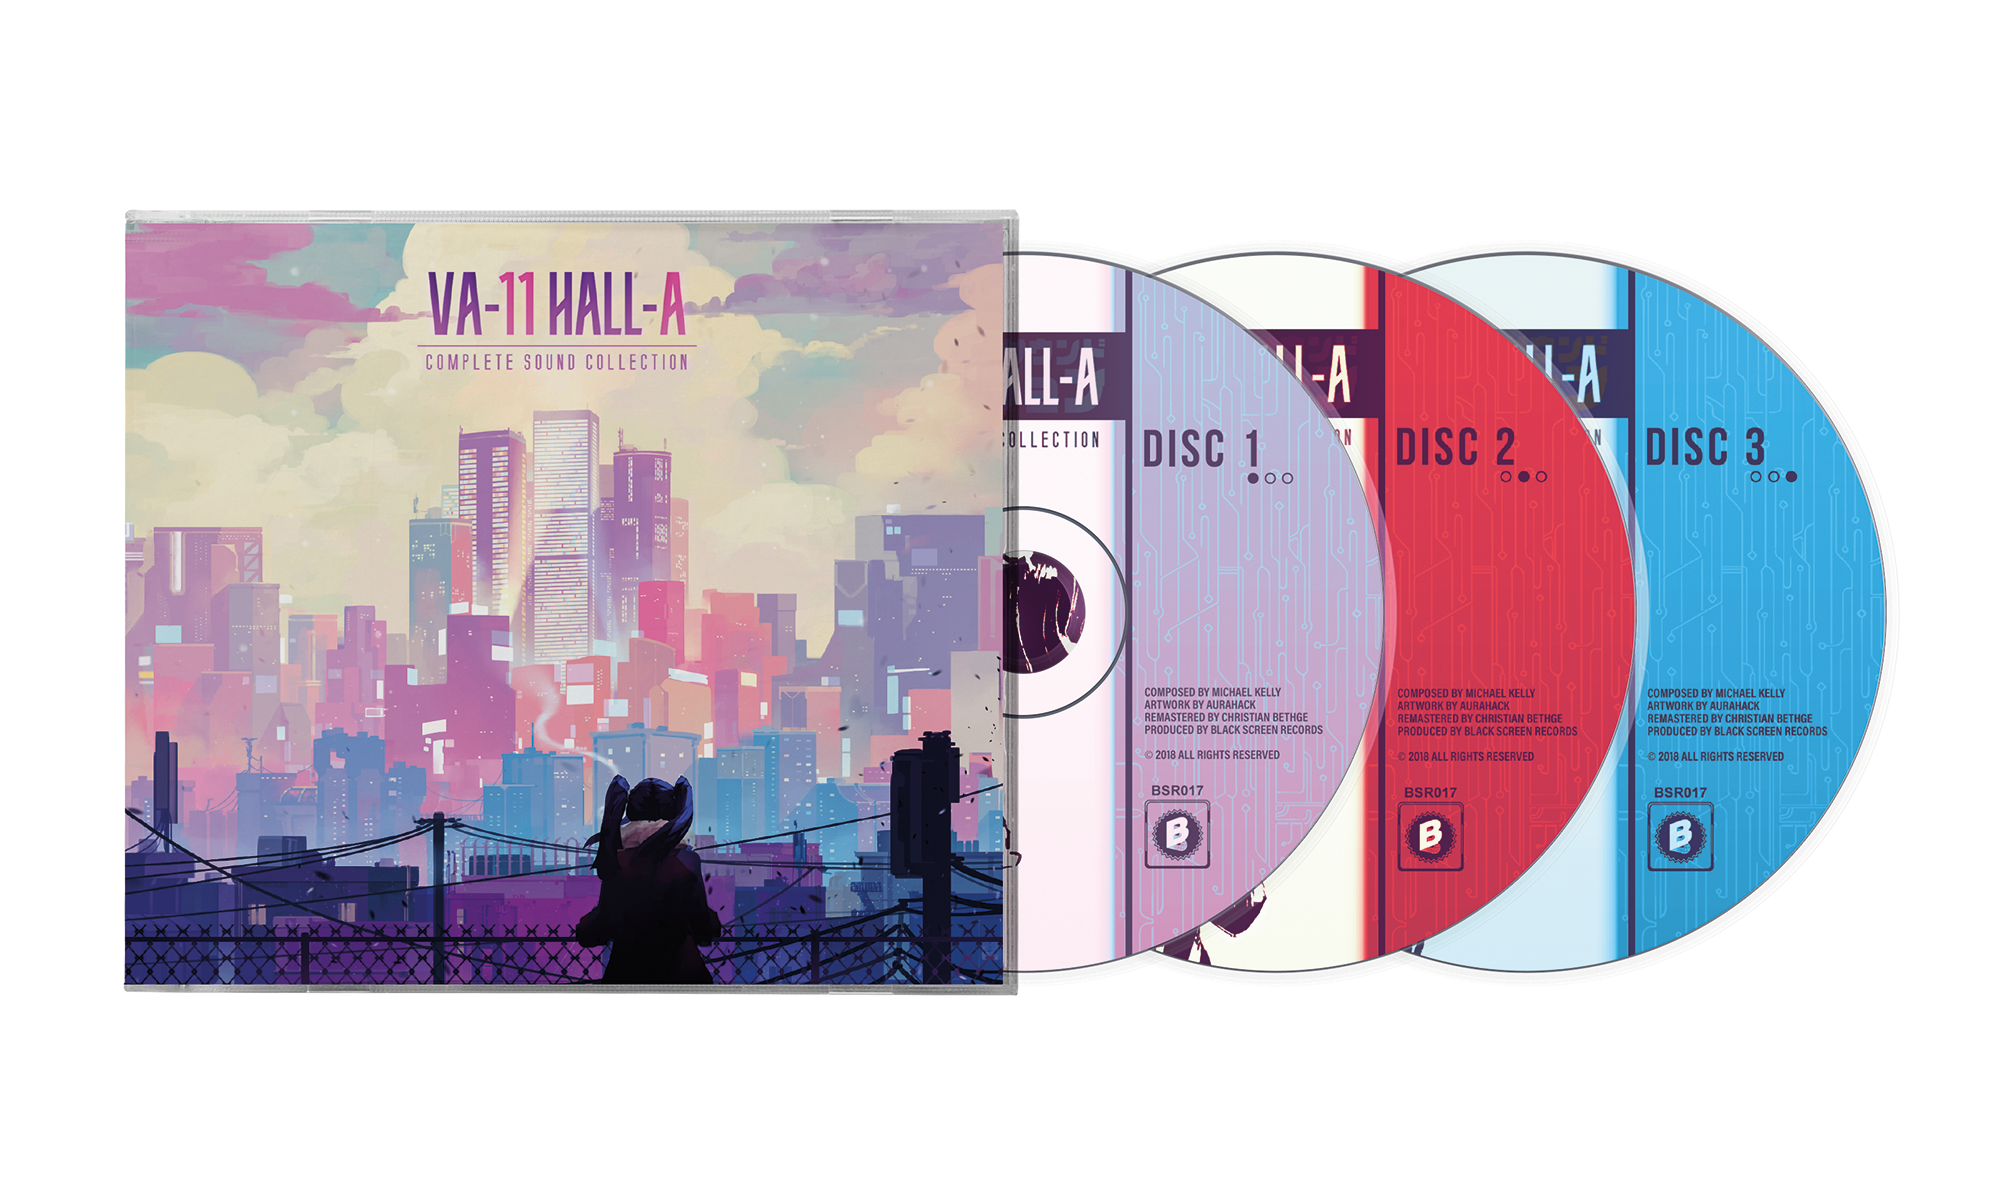 VA-11 HALL-A (Complete Sound Collection) by Garoad • CD – Black